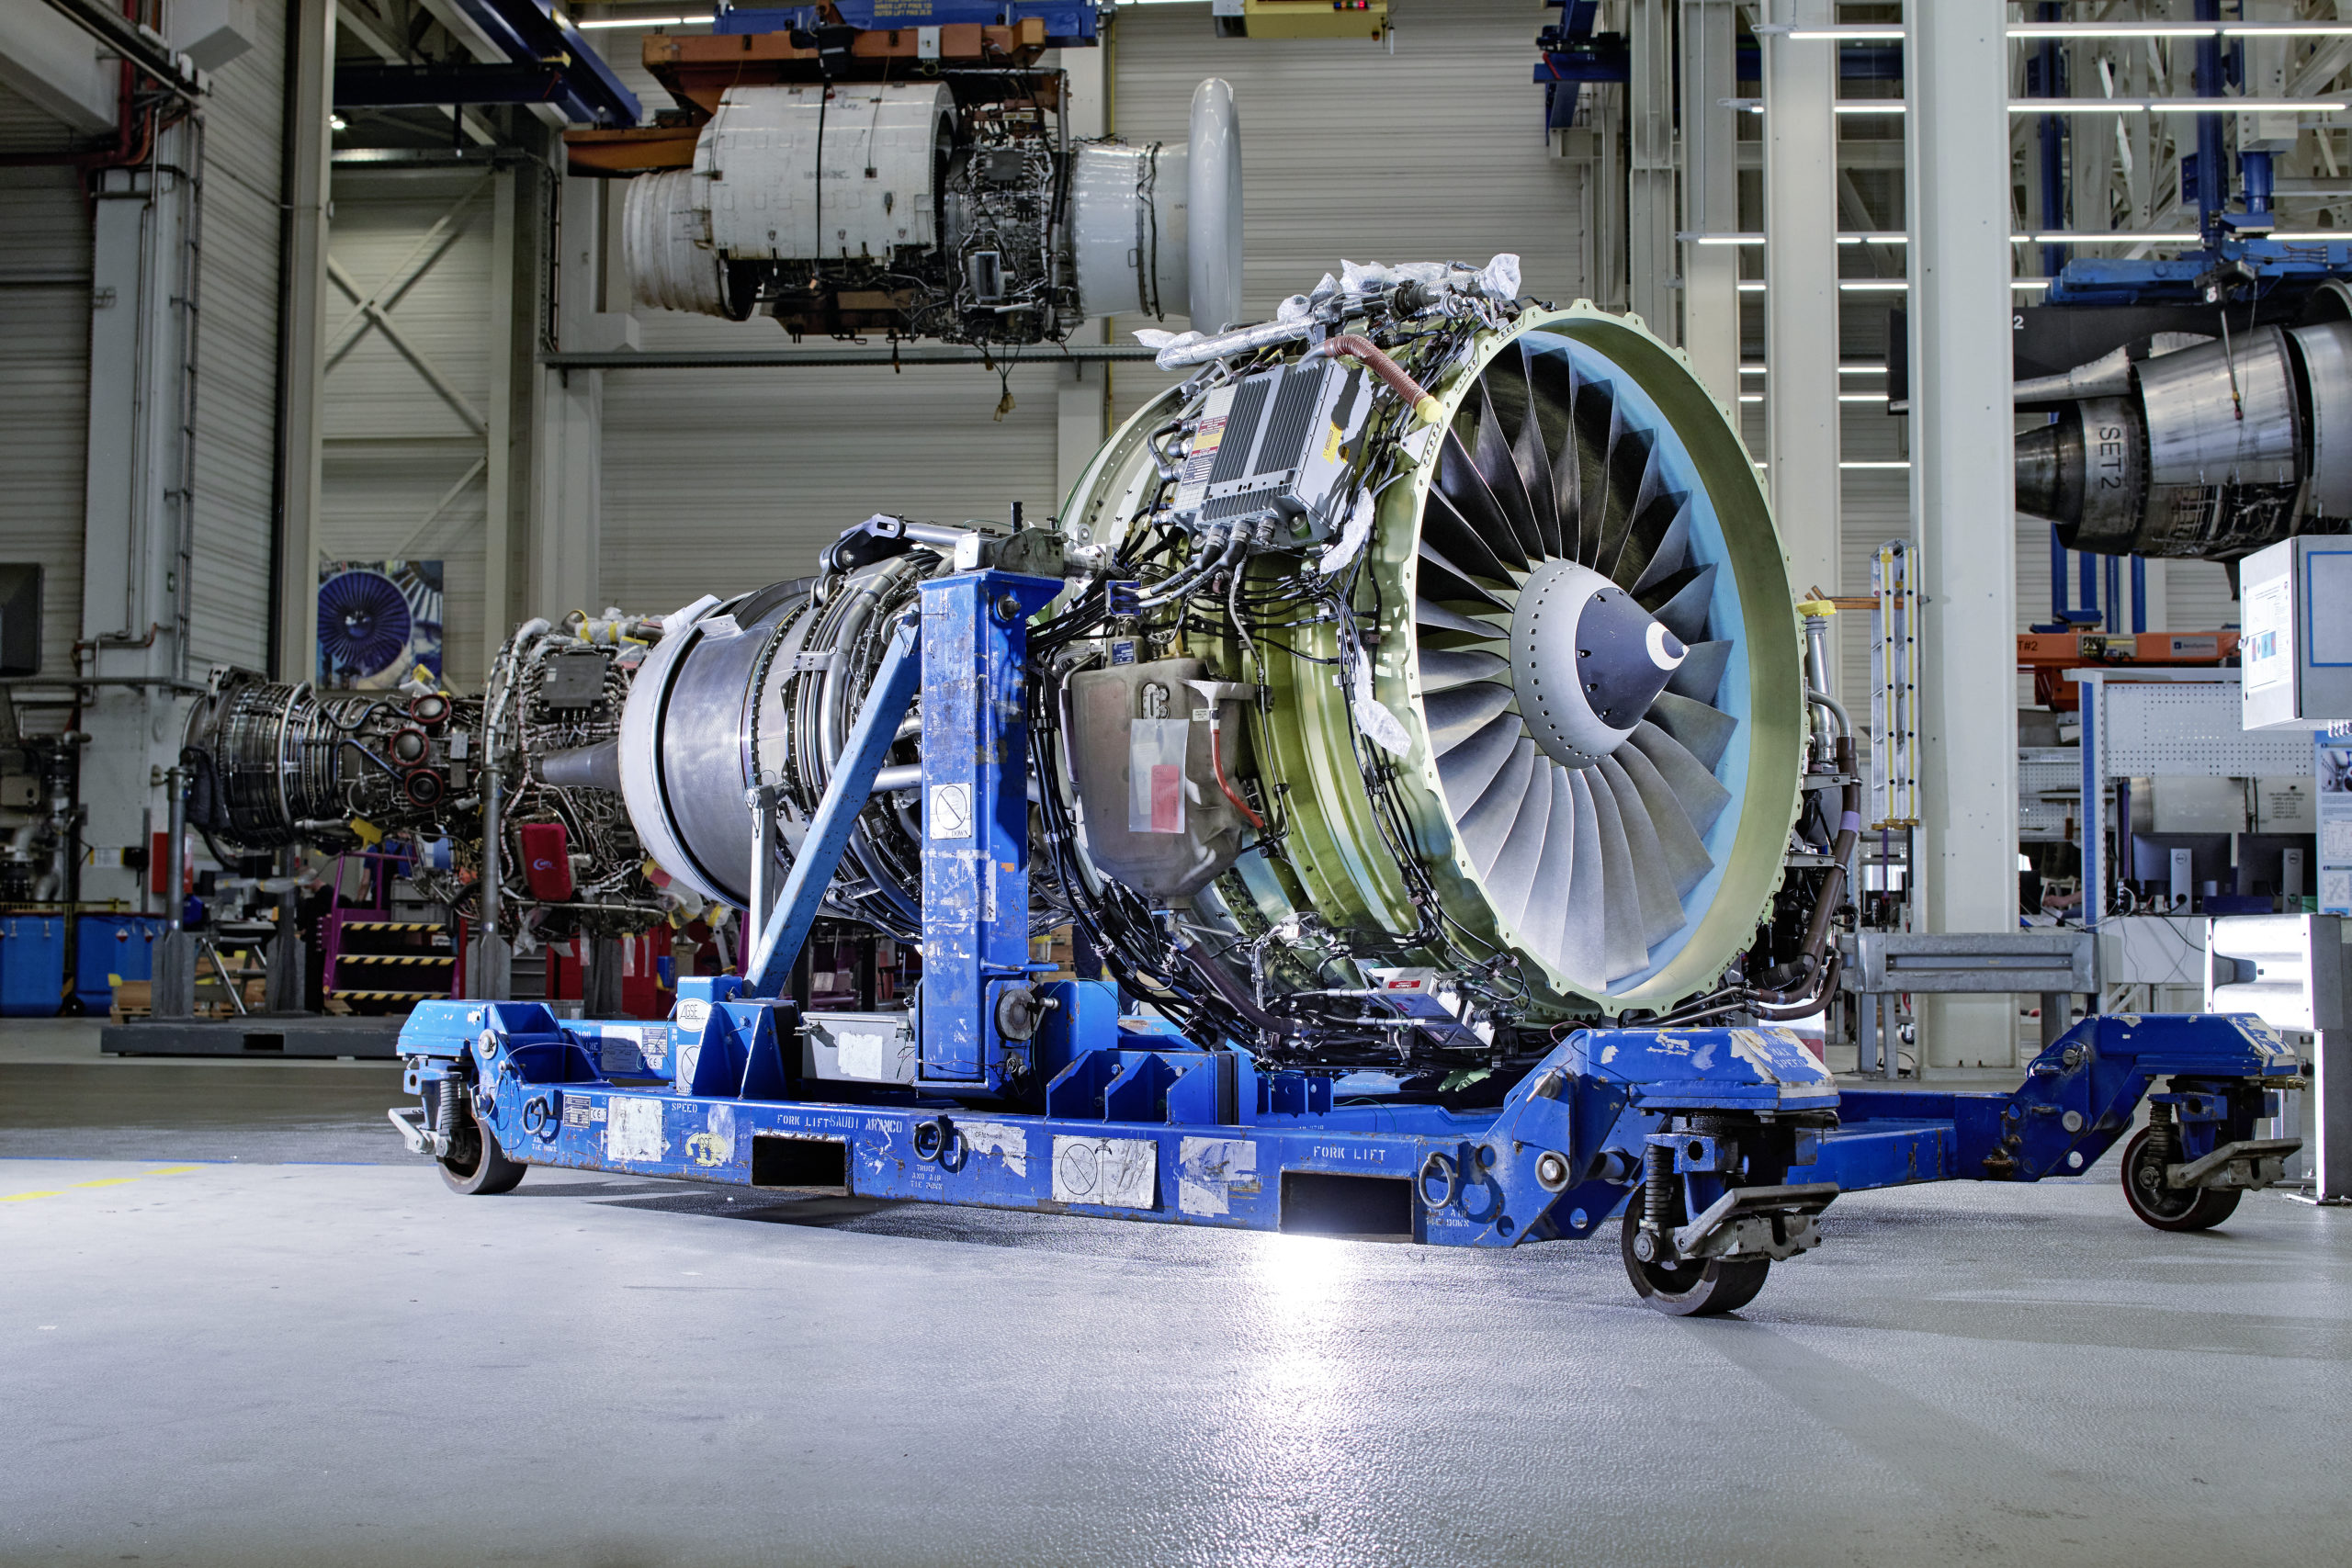 IBA predicts that the engine CFM56-7B is seeing the highest market value change with an increase of around 20% from 2023 to 2024